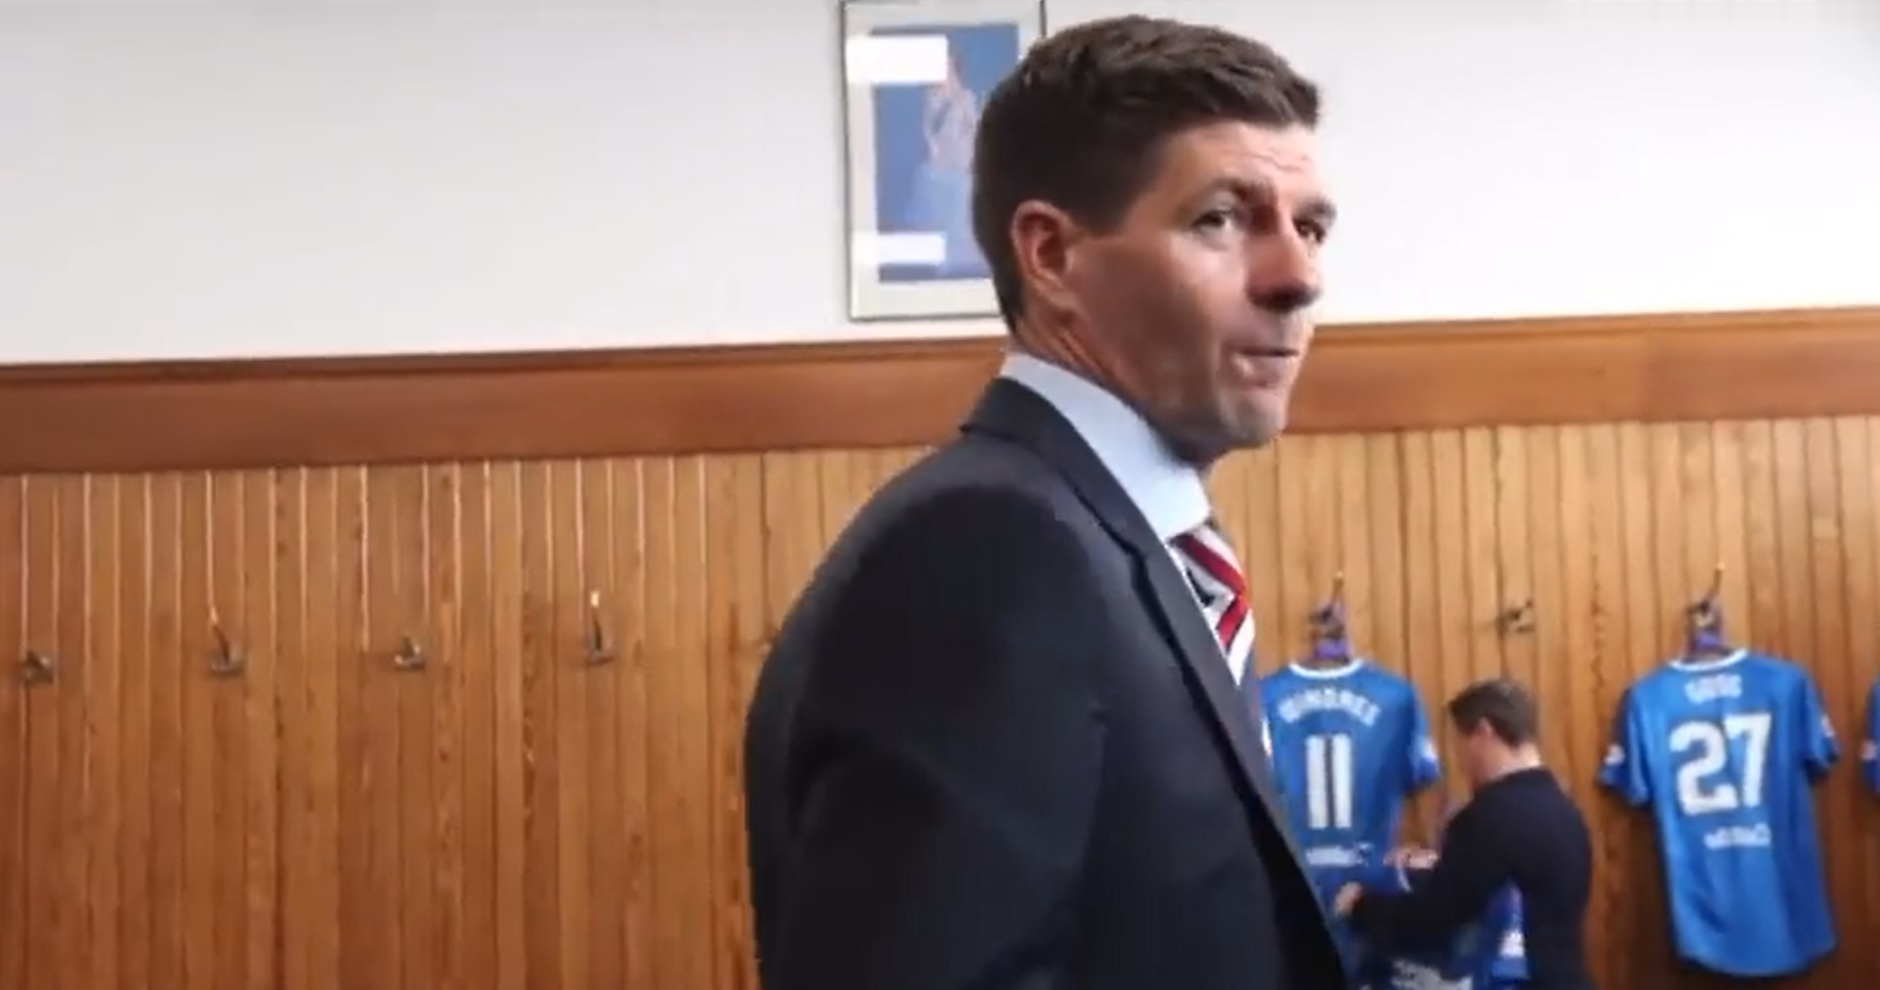 (Video) Old clip of Gerrard’s reaction to spotting a picture of the Queen in Rangers dressing room revived on Twitter